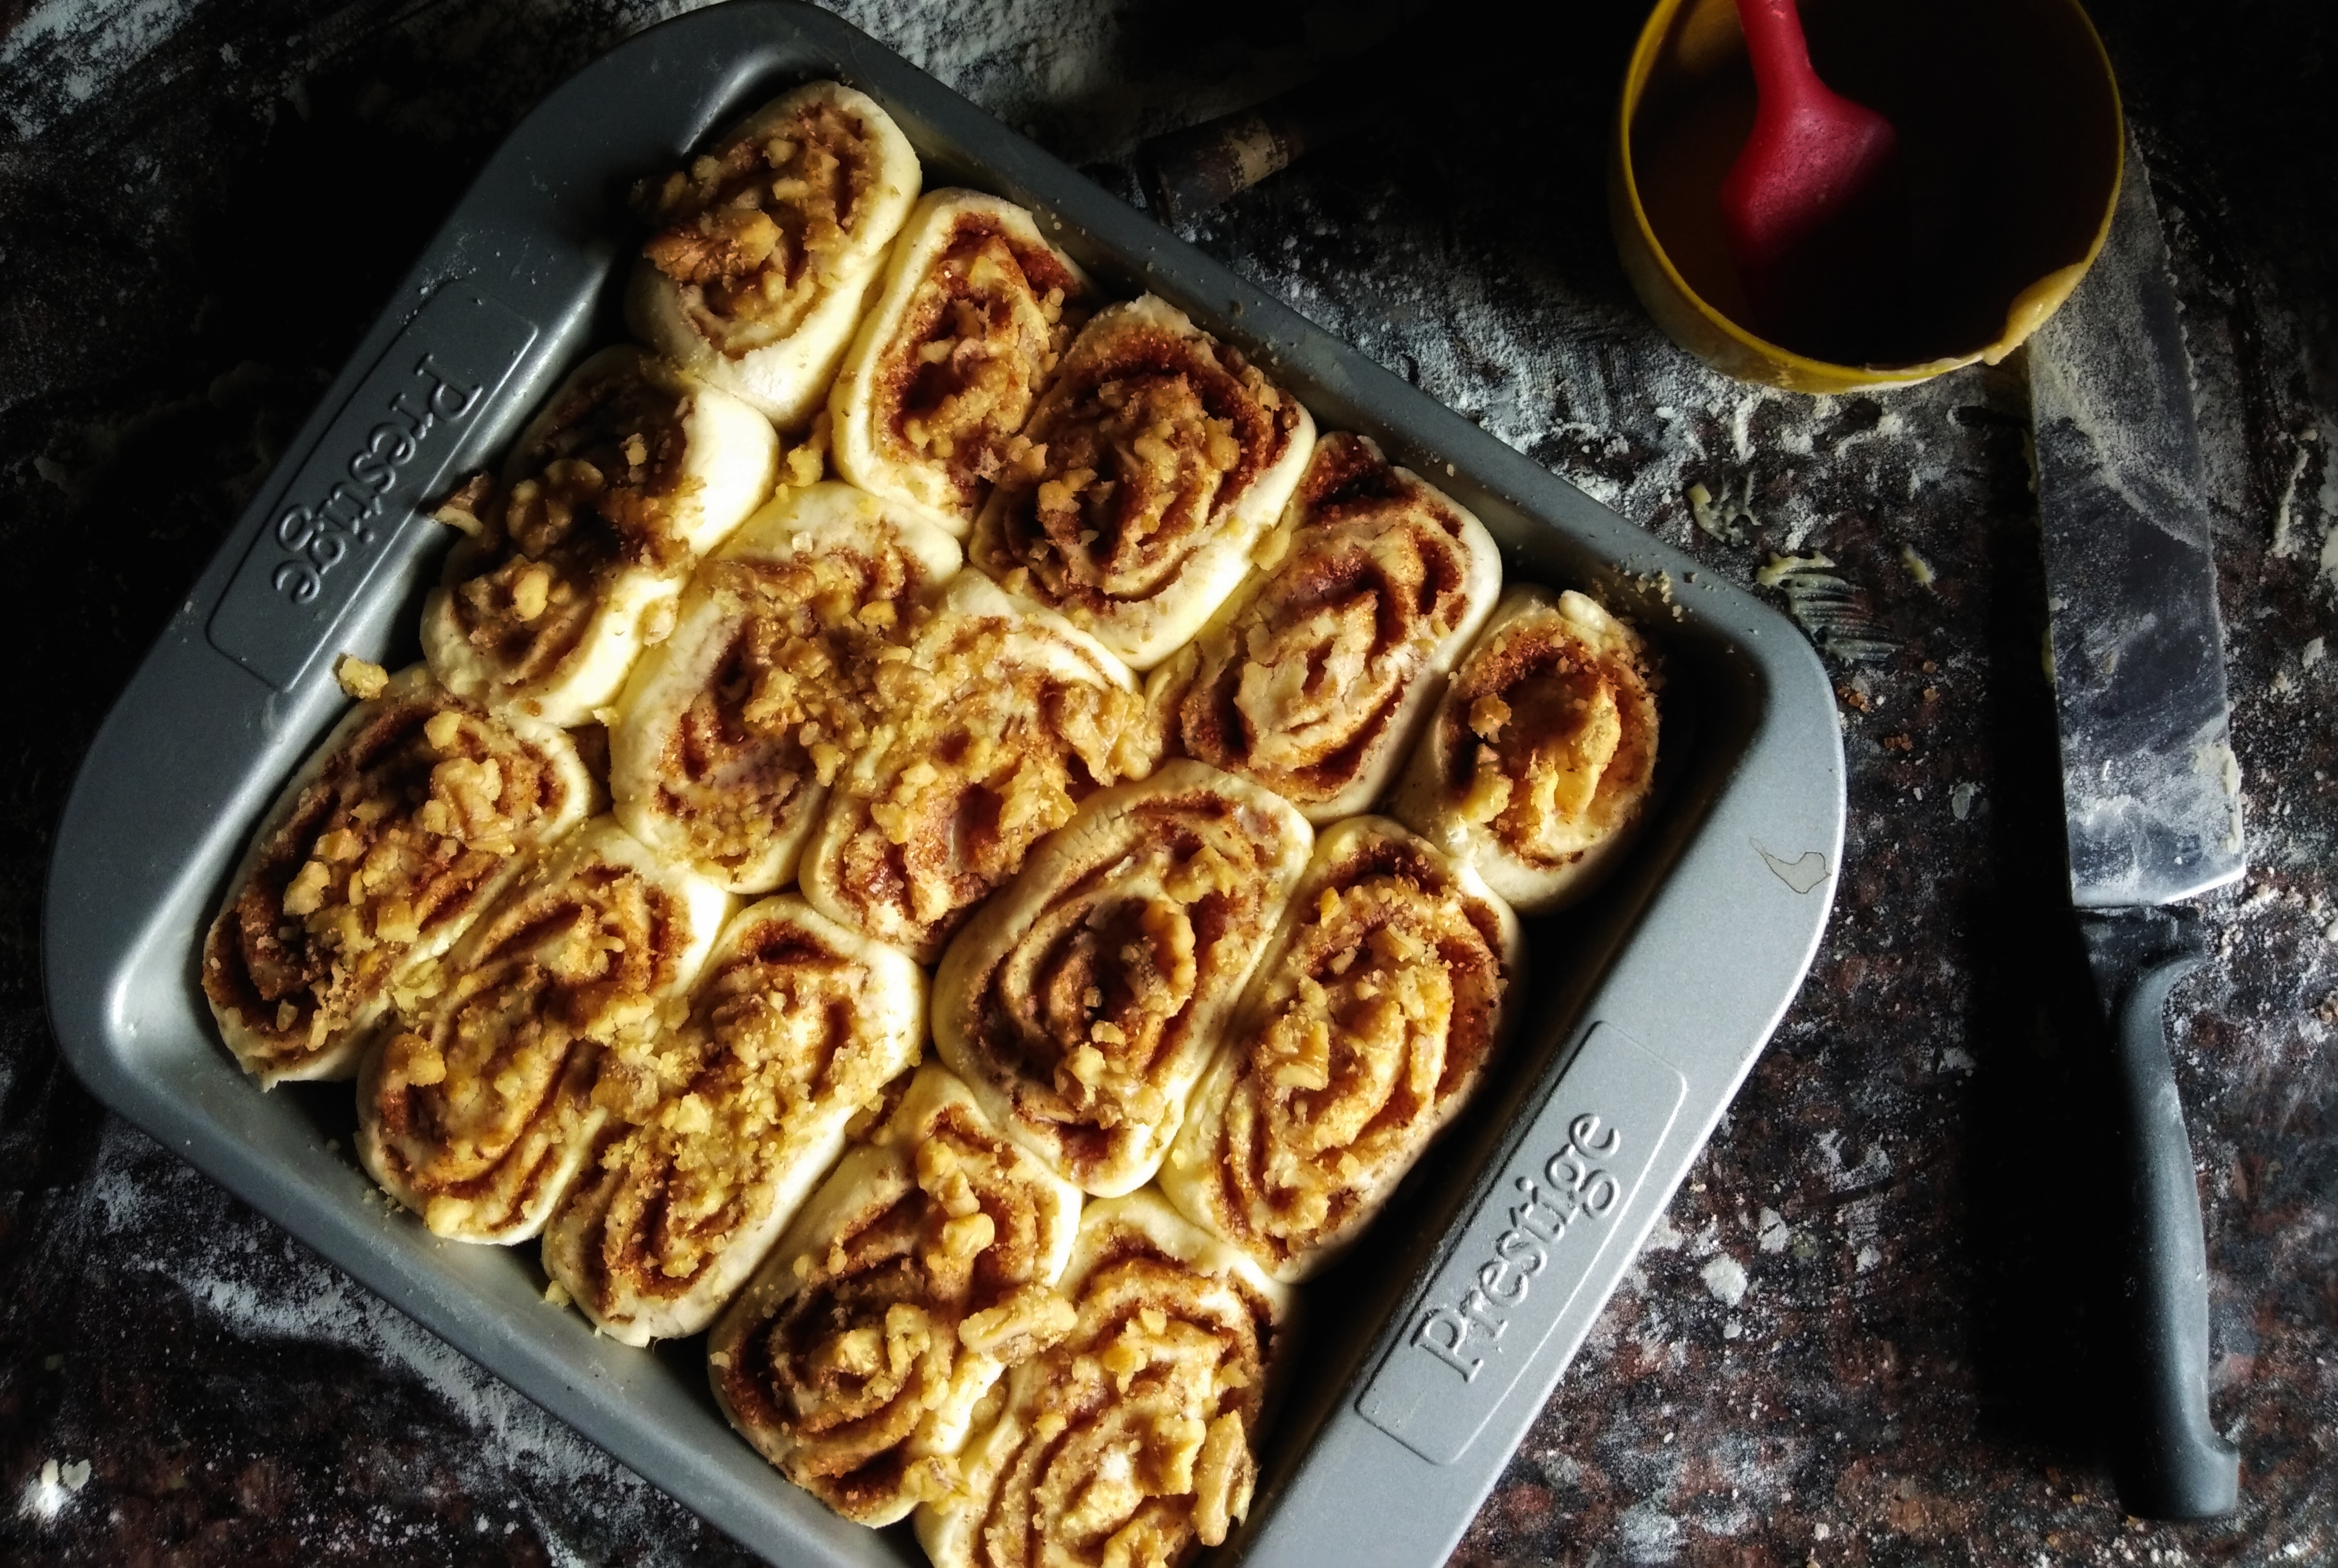 Cinnamon Rolls with Cream Cheese frosting